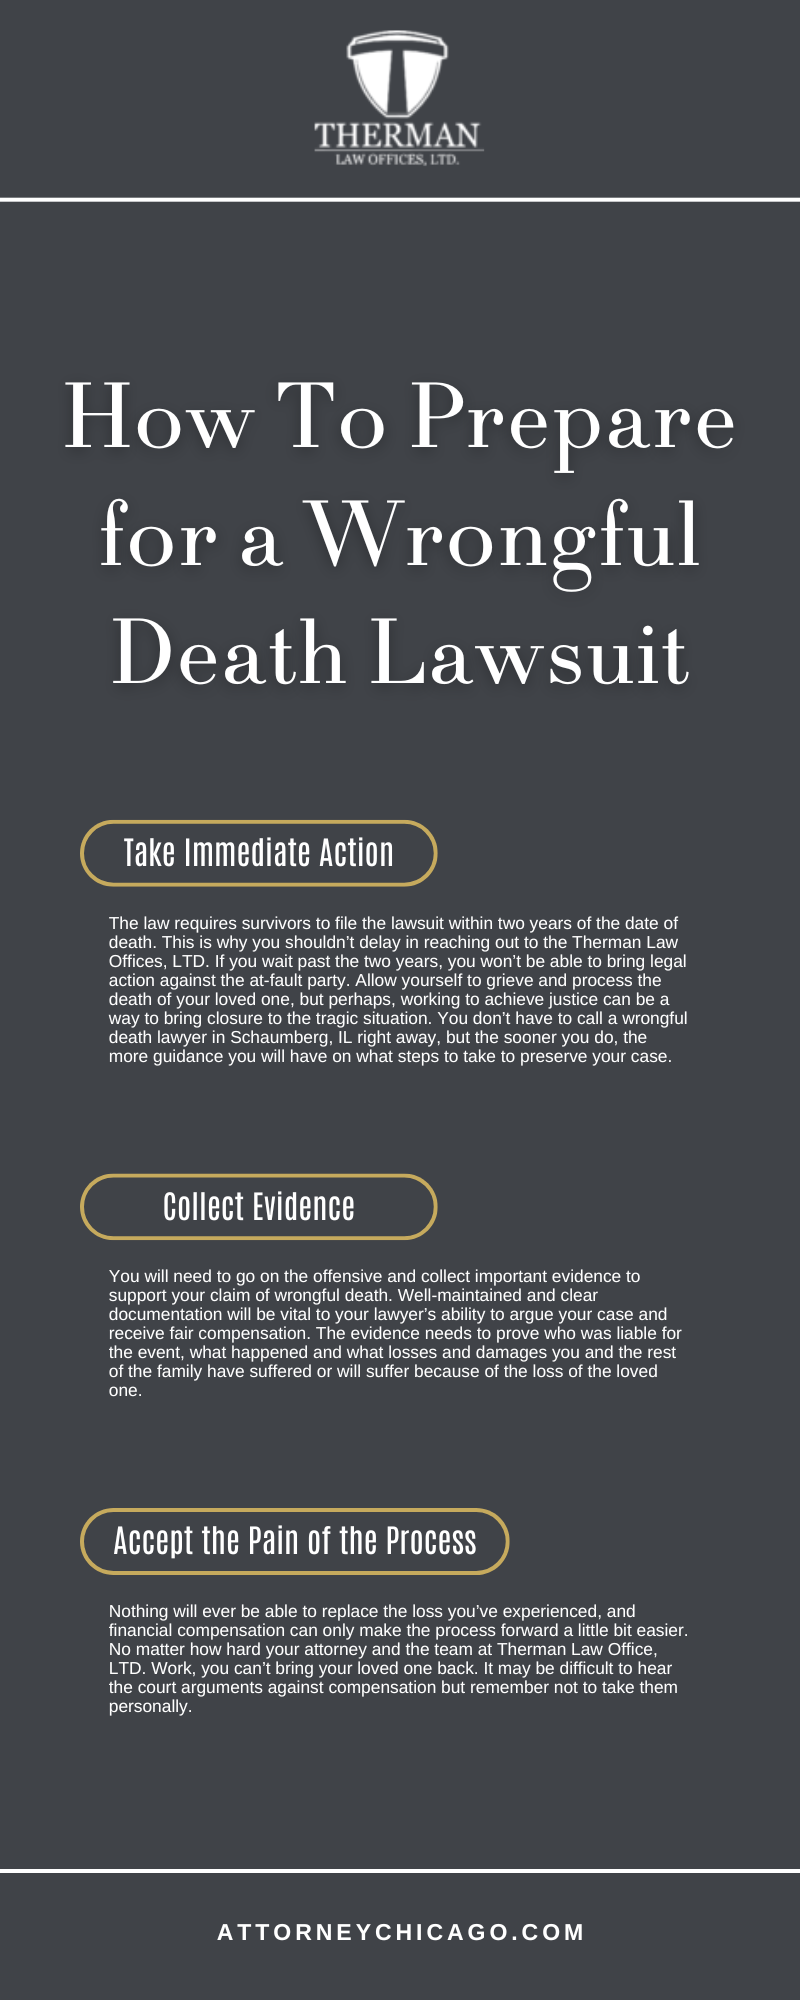 How To Prepare for a Wrongful Death Lawsuit Infographic